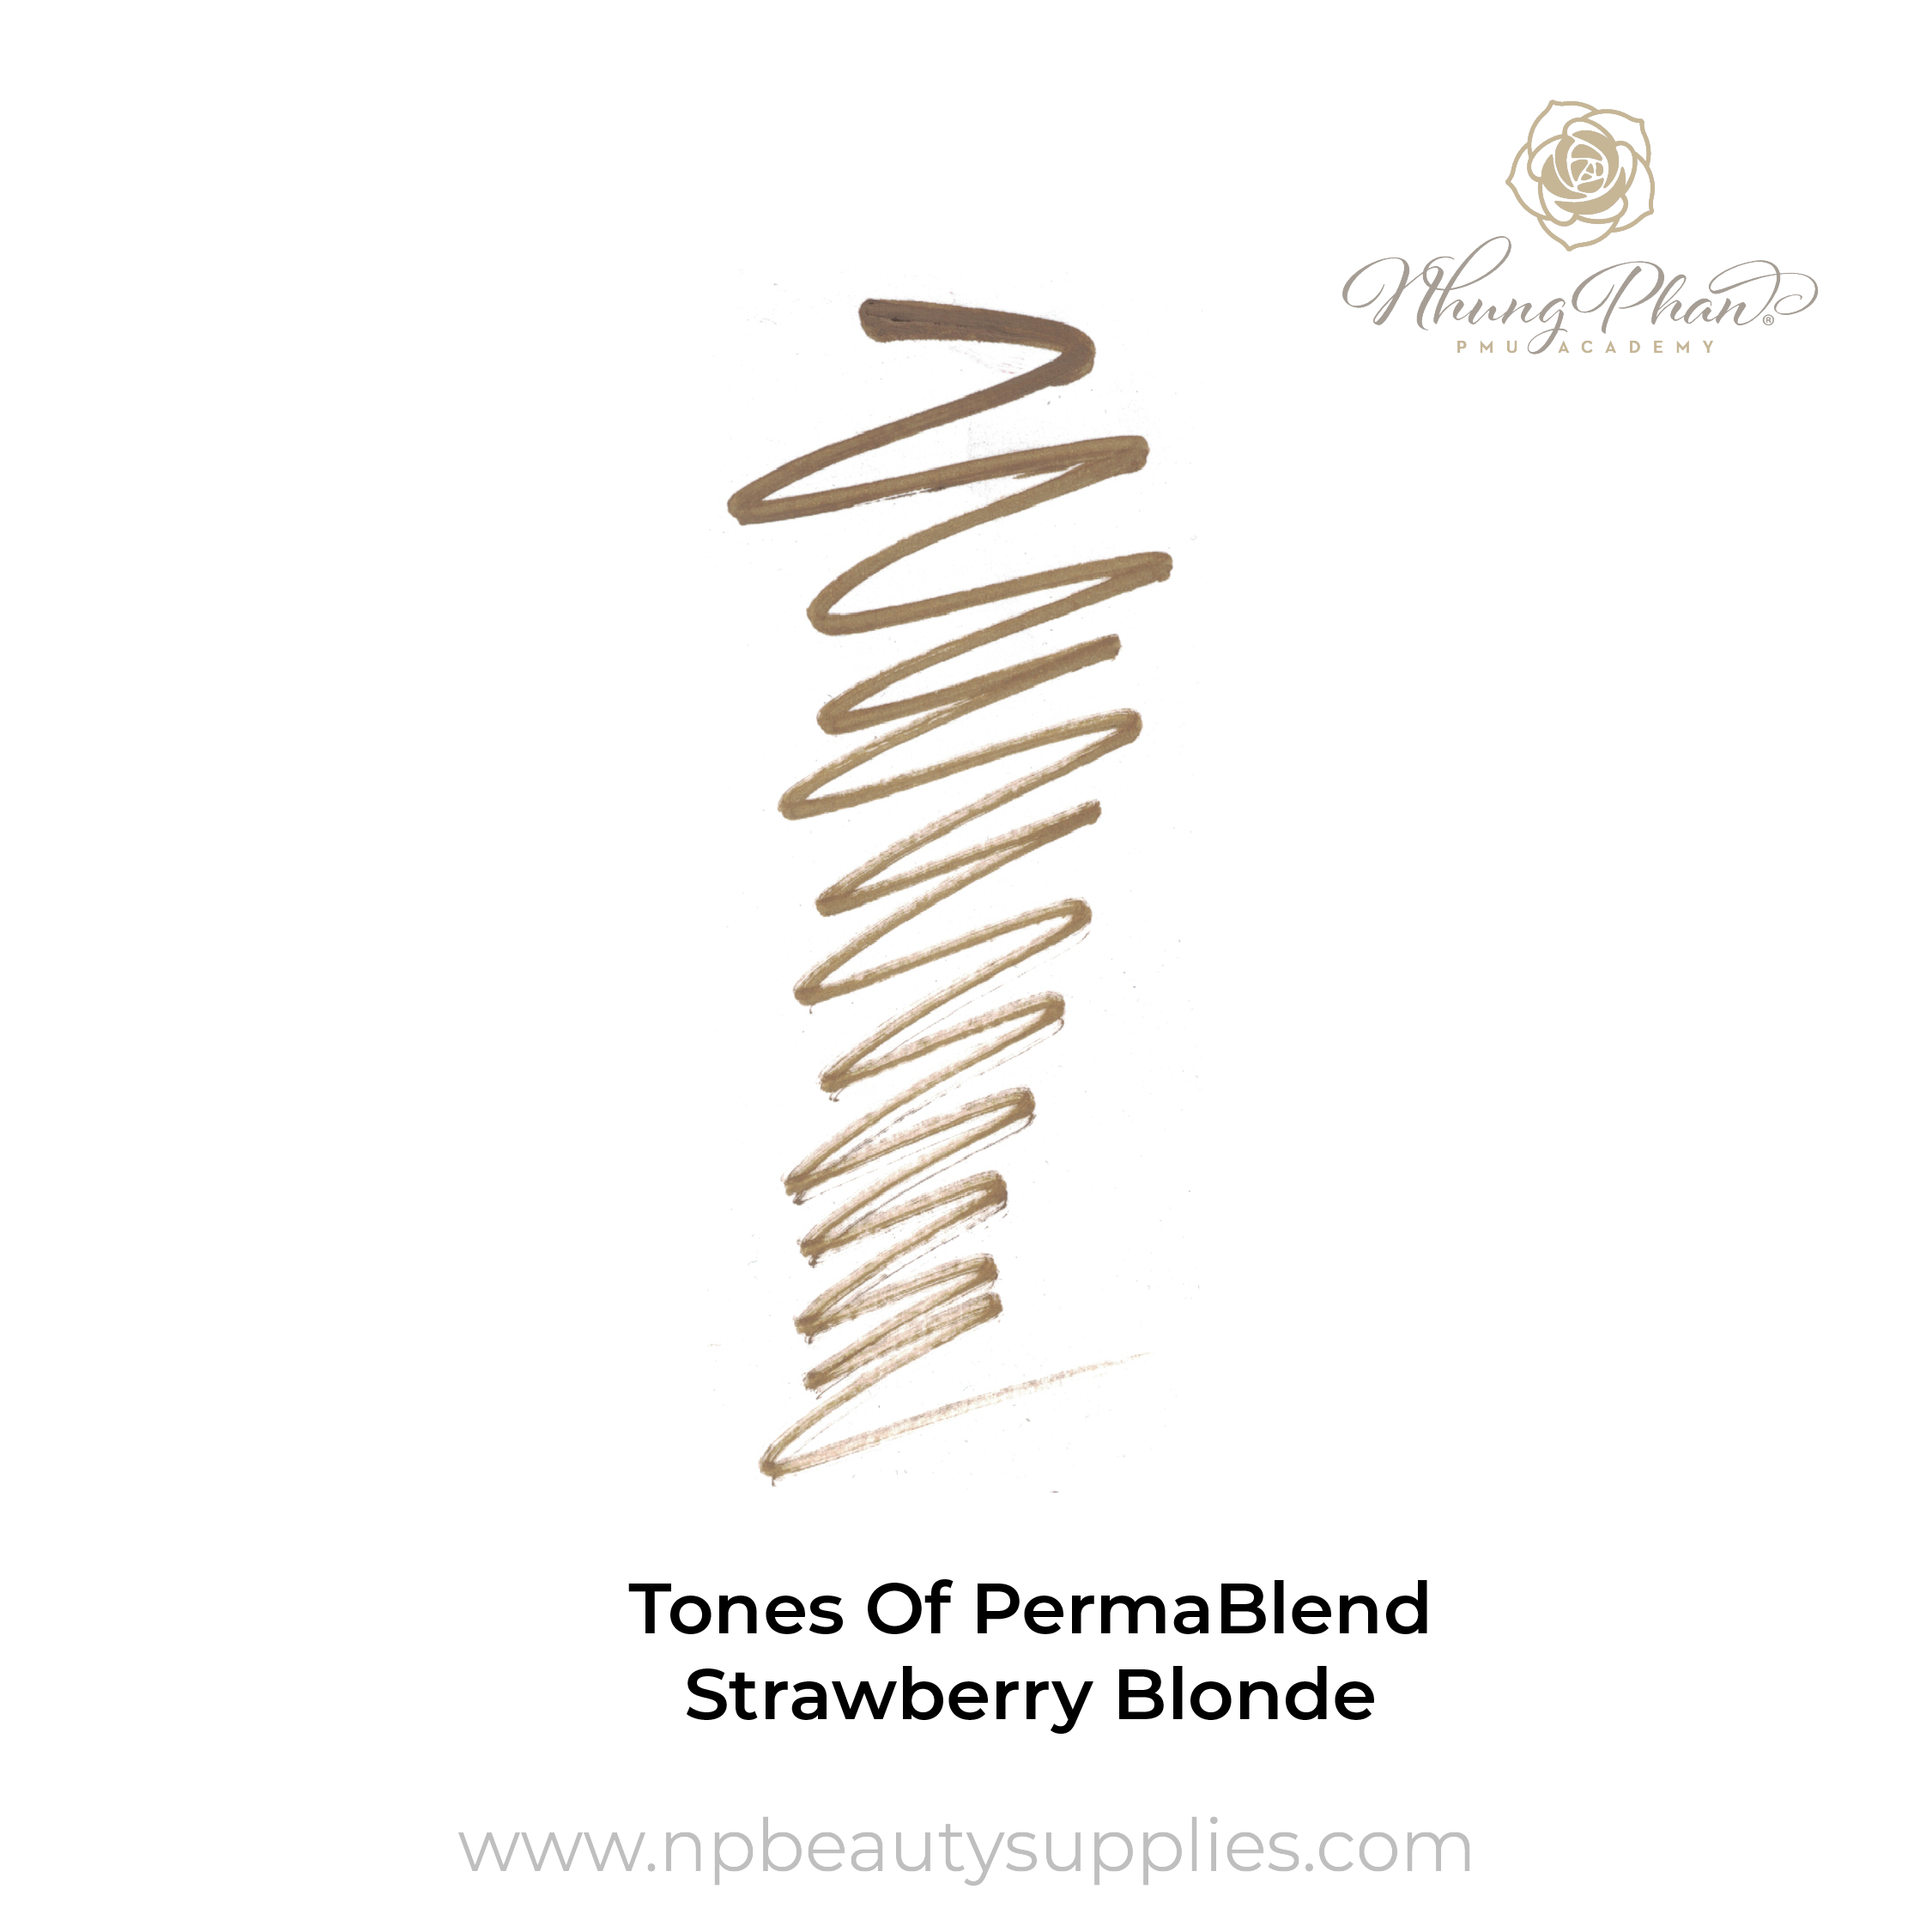 Tones Of PermaBlend - Strawberry Blonde